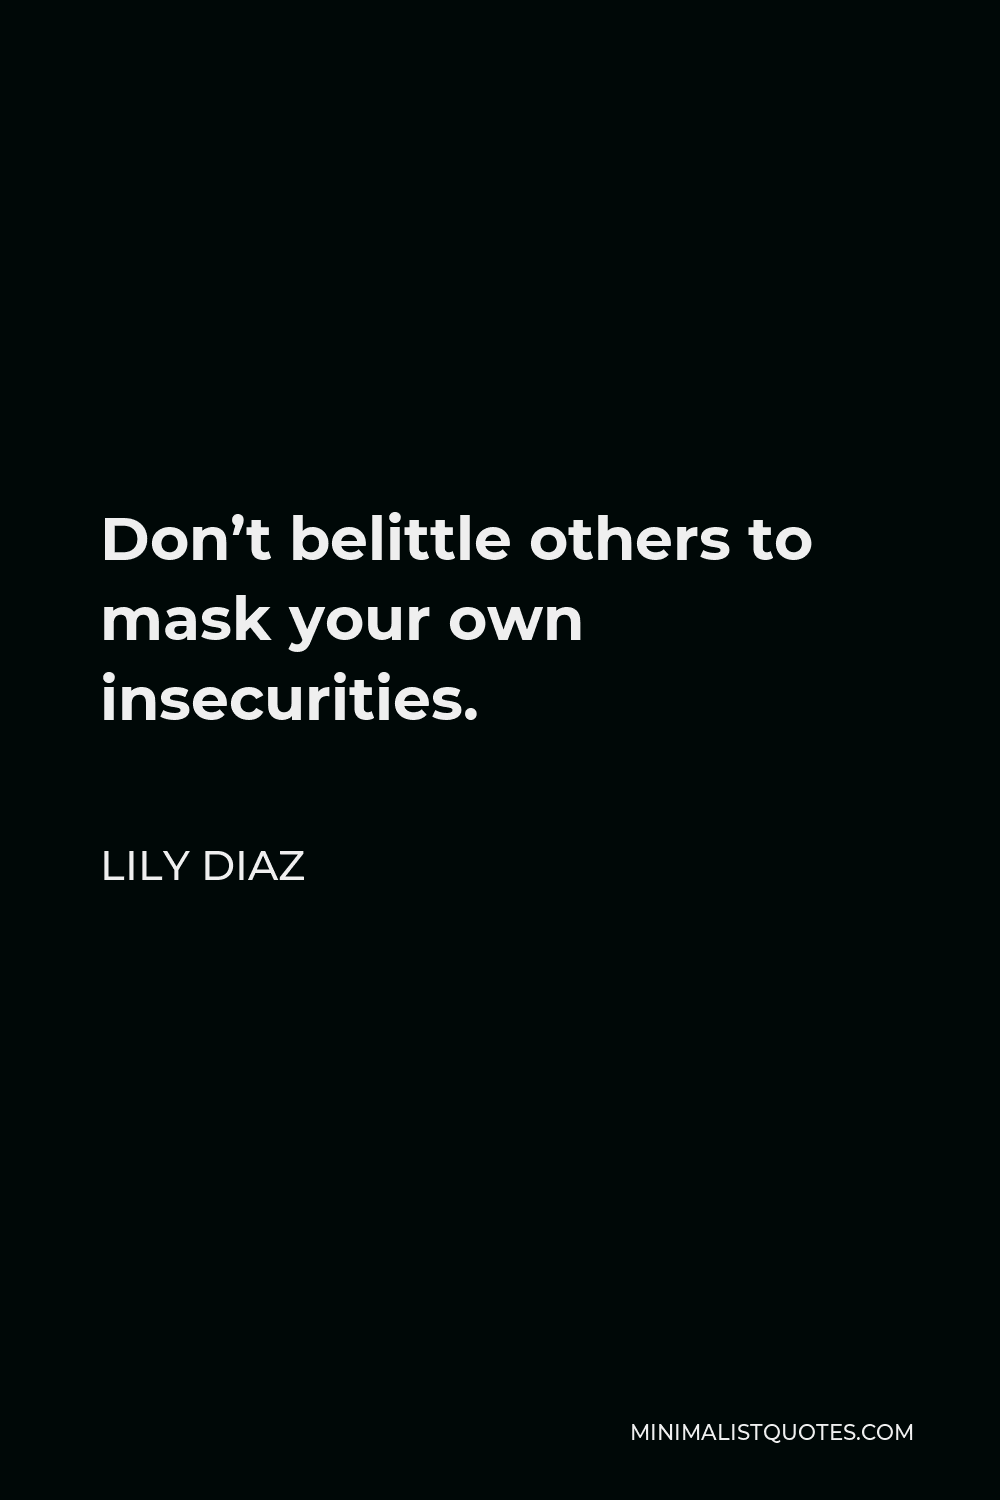 Lily Diaz Quote - Don’t belittle others to mask your own insecurities.